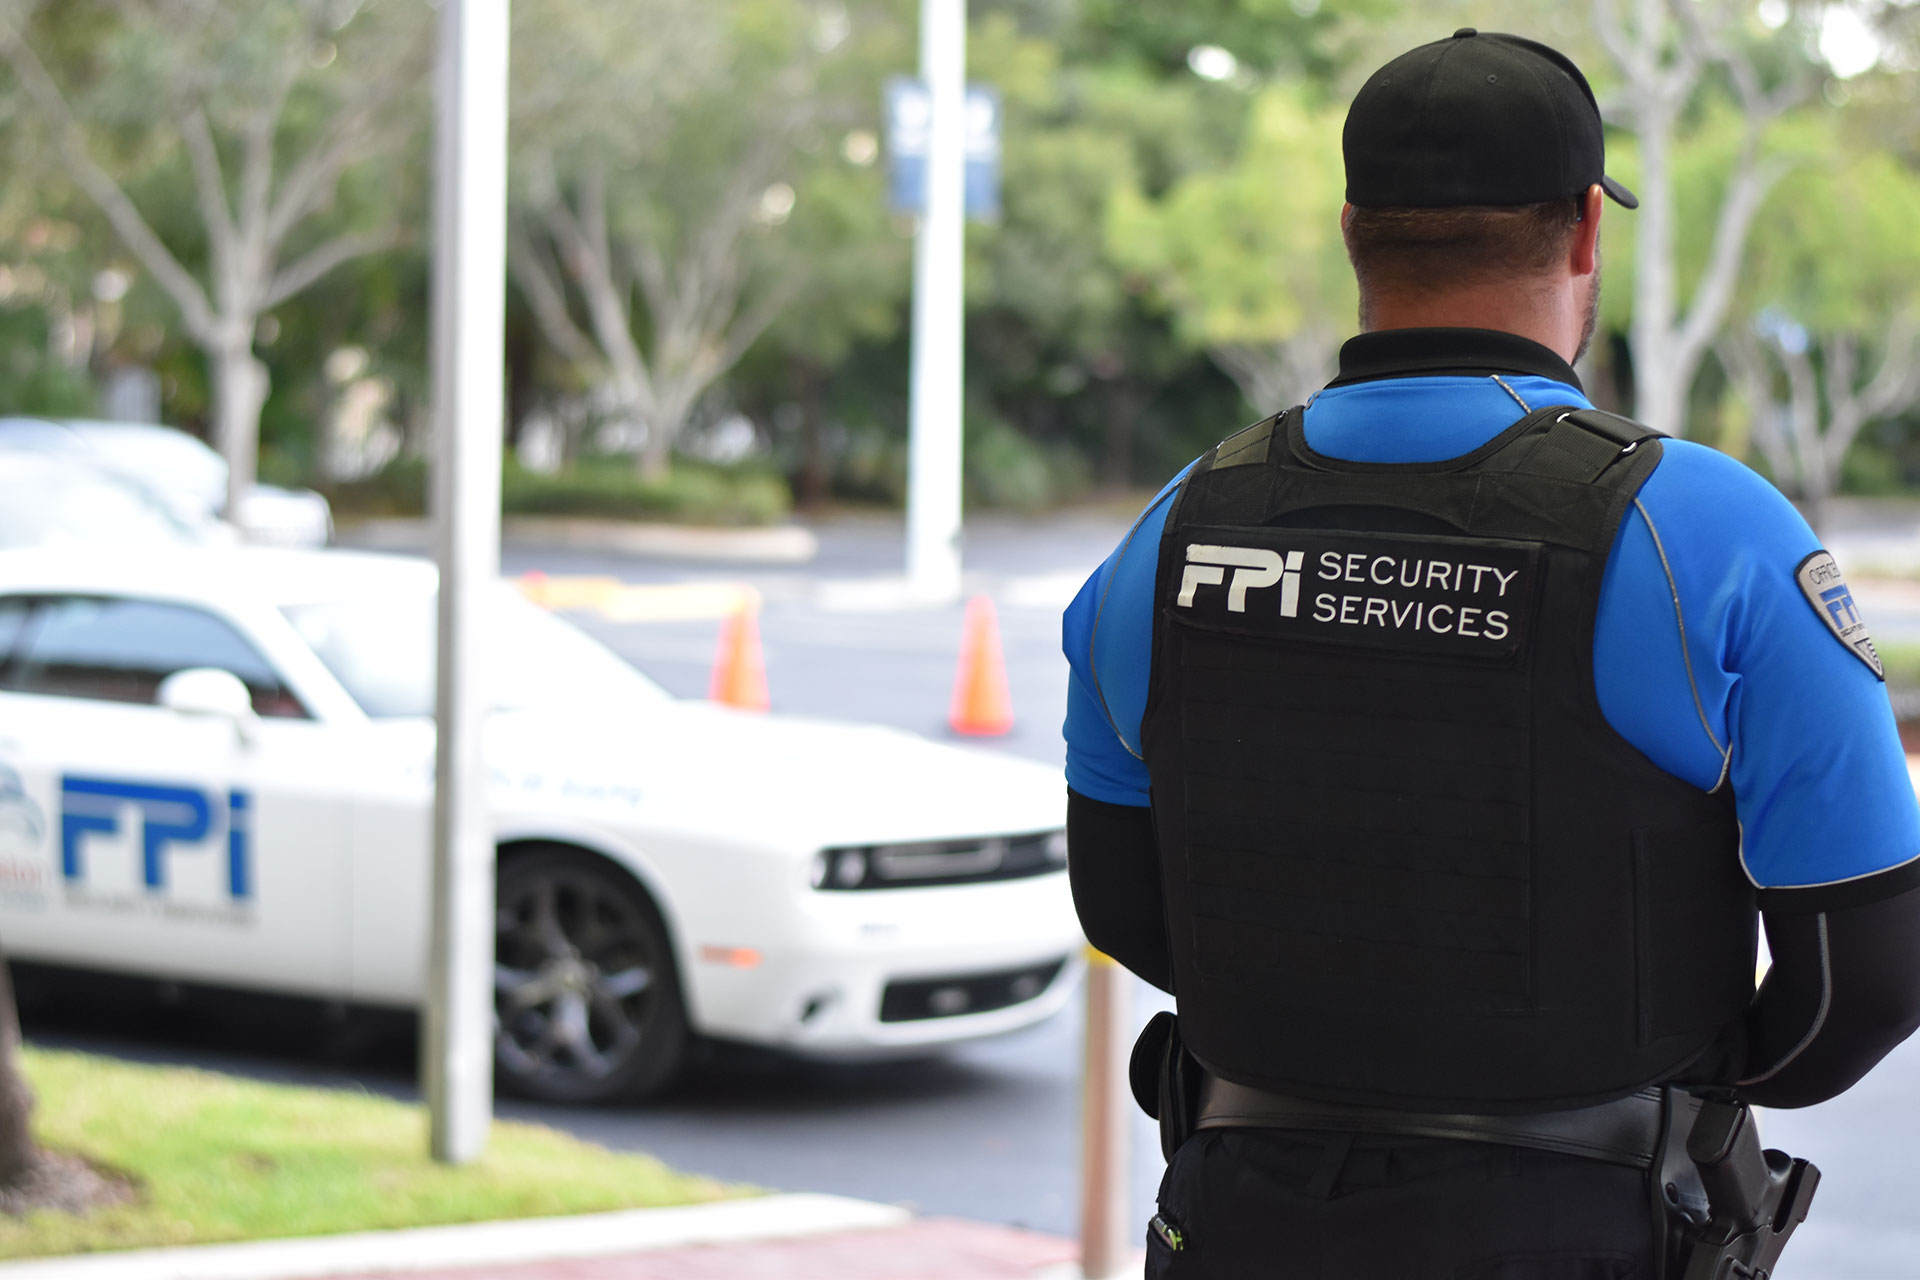 FPI Security Services